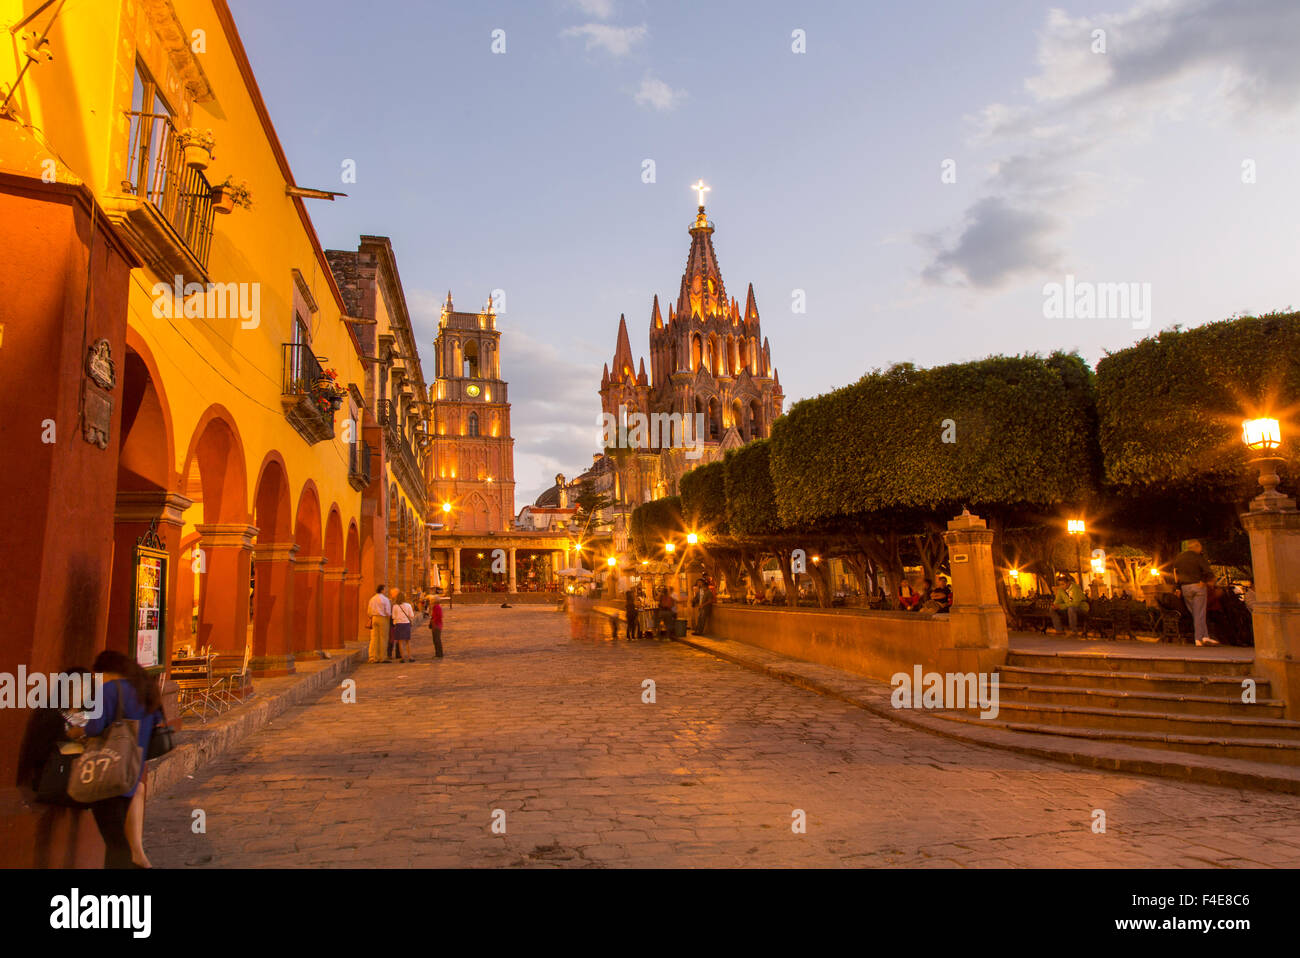 The Town Square aka Jardin at dusk in the Centro district of San Miguel de Allende, Mexico. Stock Photo